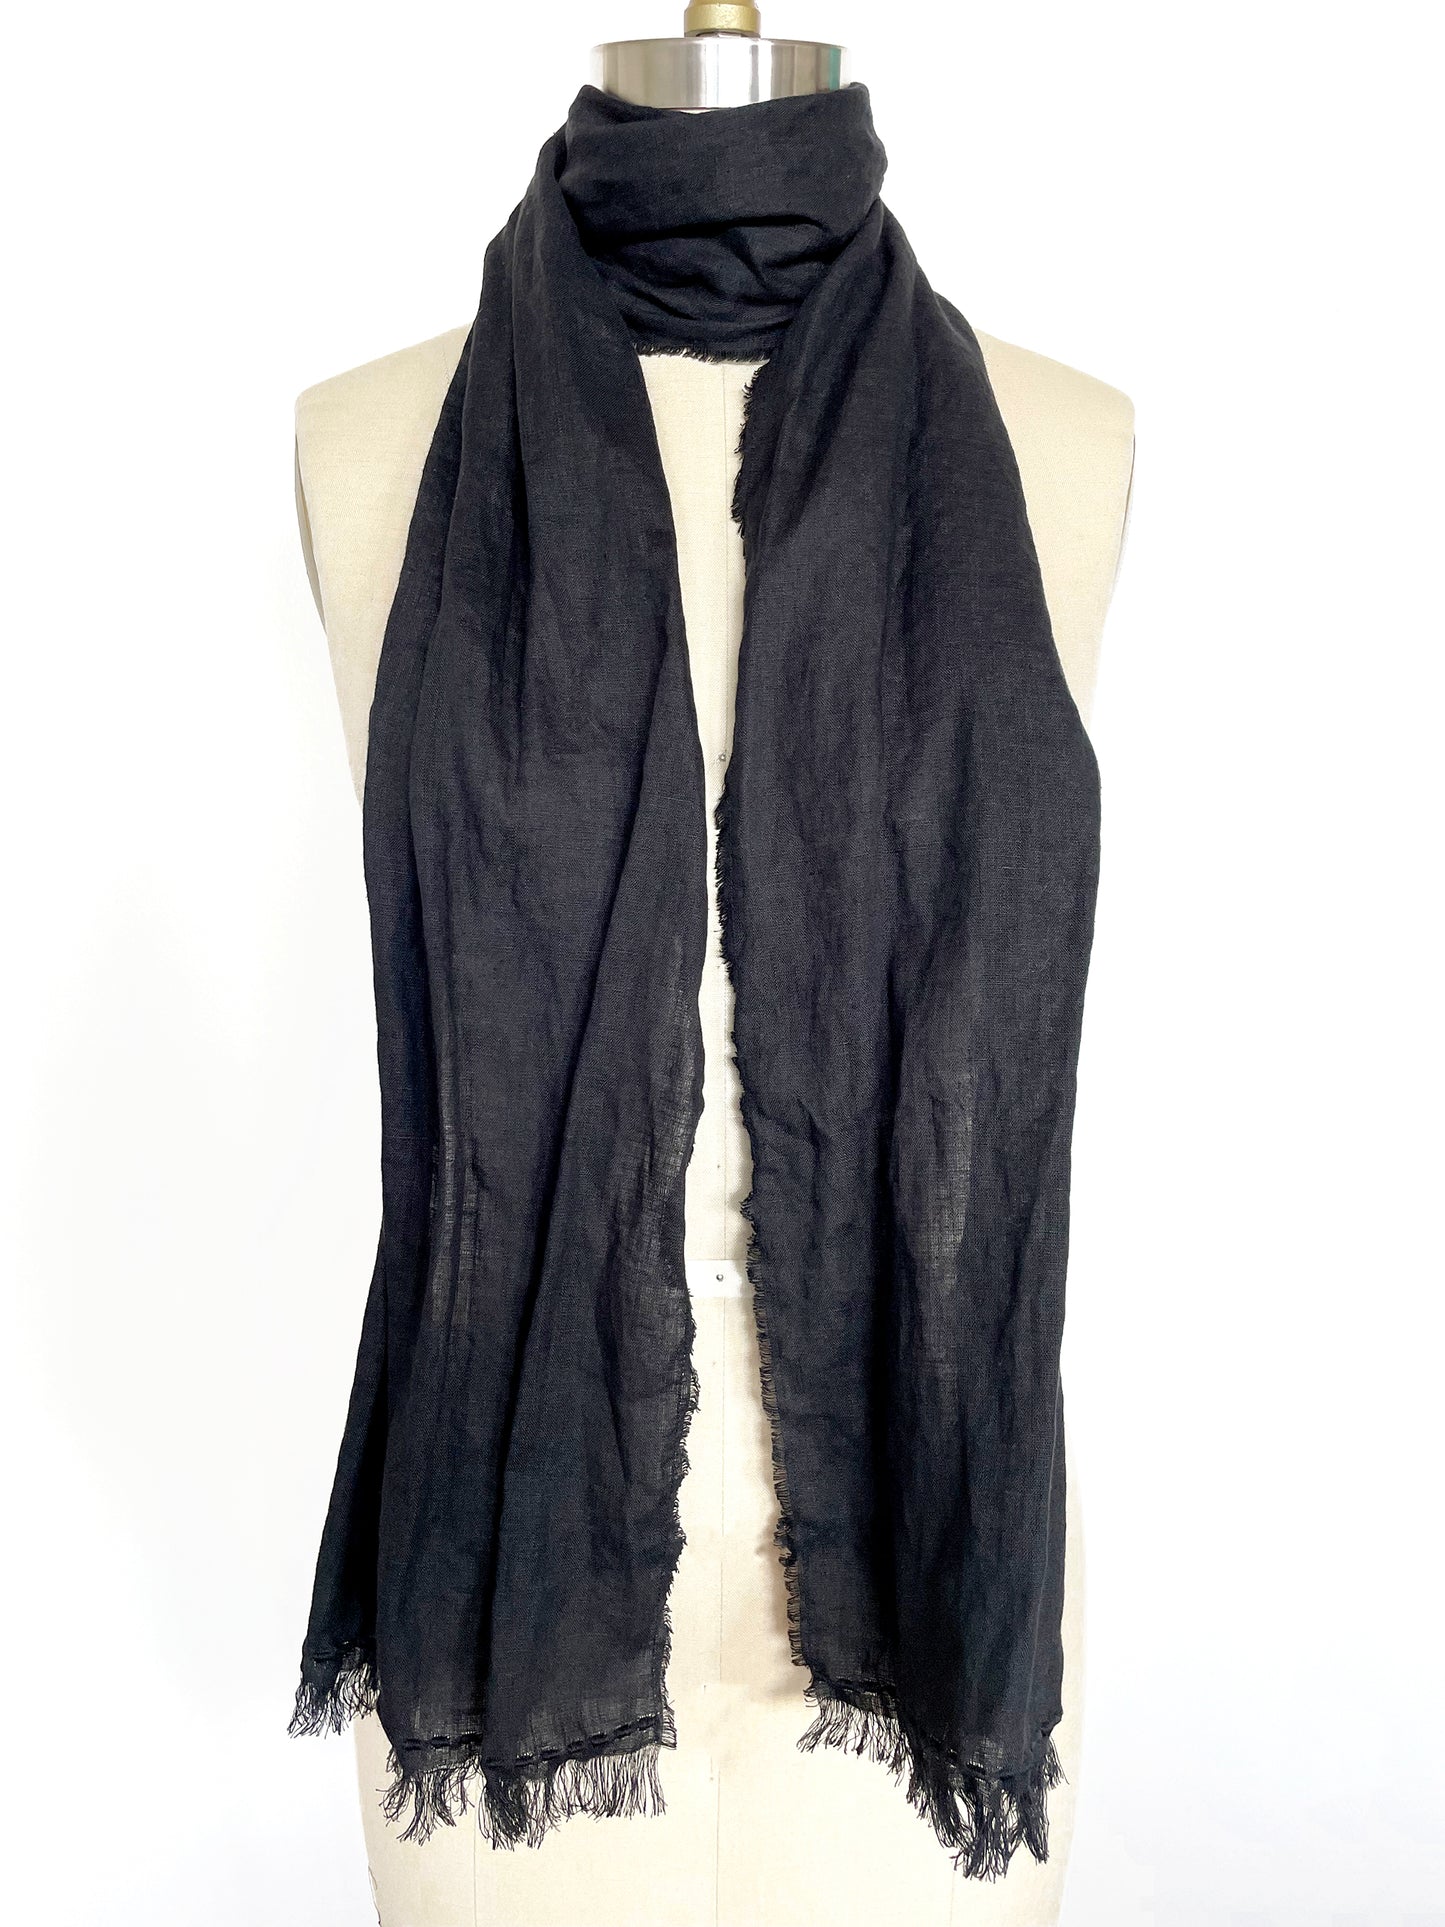 Fringed Black Linen Scarf with Embroidery, Unisex, Two Sizes